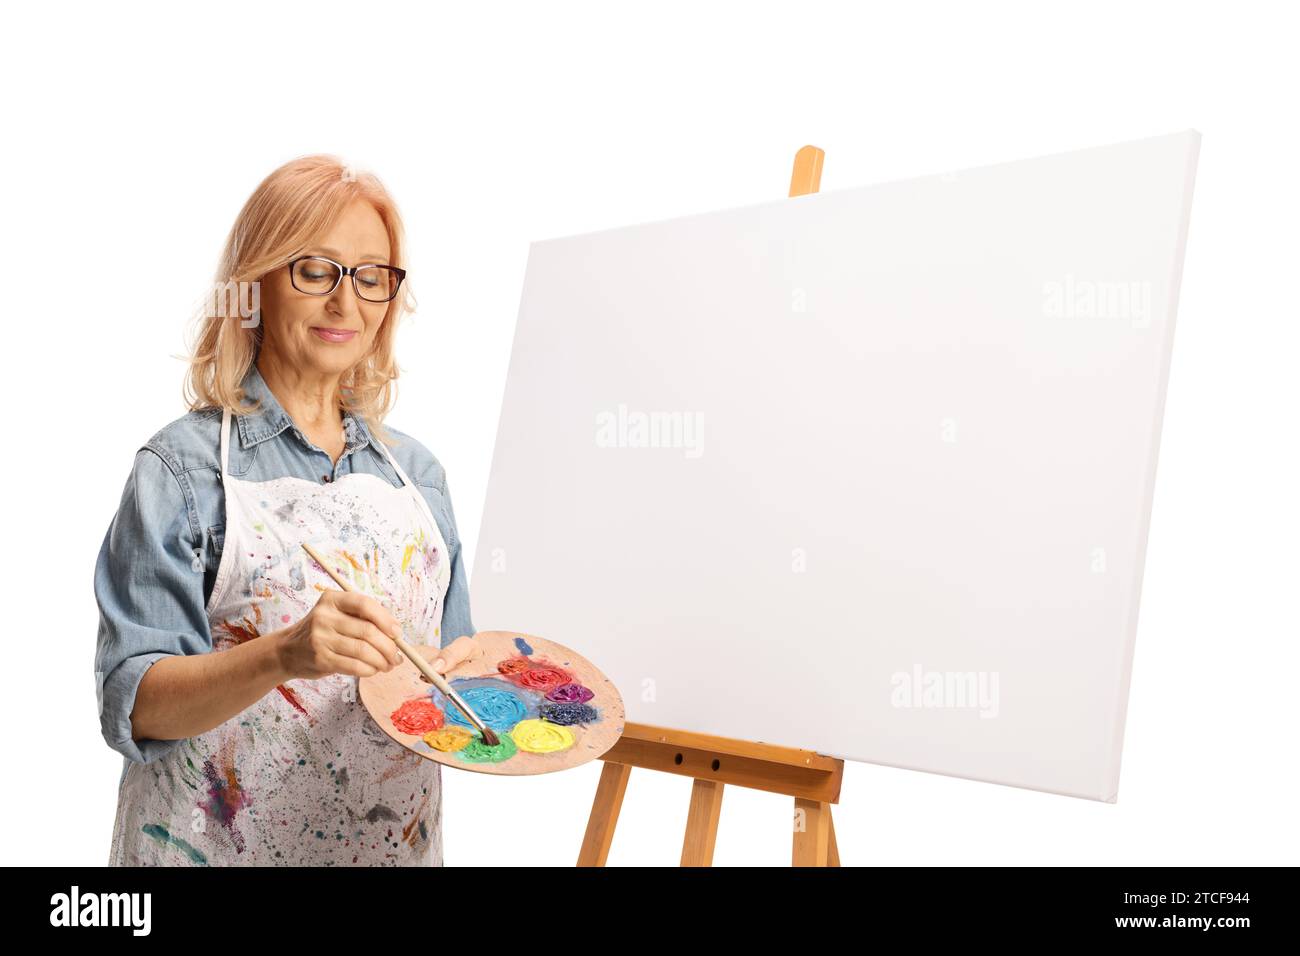 artist apron with paint brushes hanging on brick wall Stock Photo - Alamy